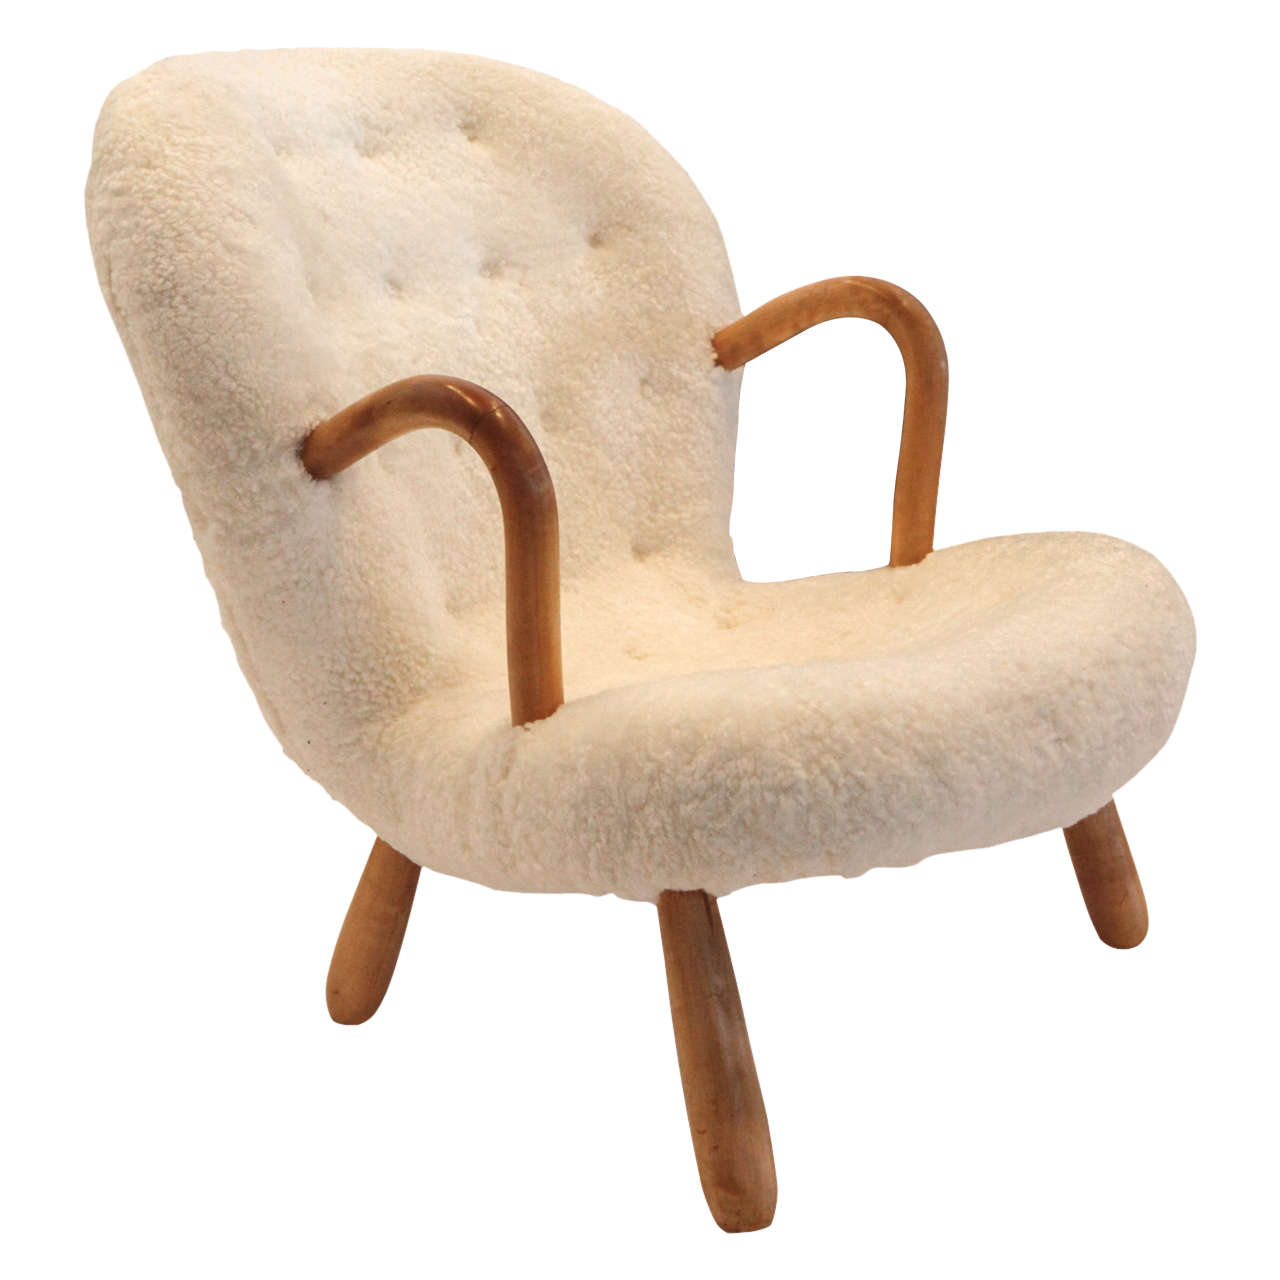 Chair by Philip Arctander (1916-1994), Denmark. We'll call it the newly iconic chair from the 1940s.
In its perfect form and always confusing resume the purity
of this chair in sheepskin stand on its own.